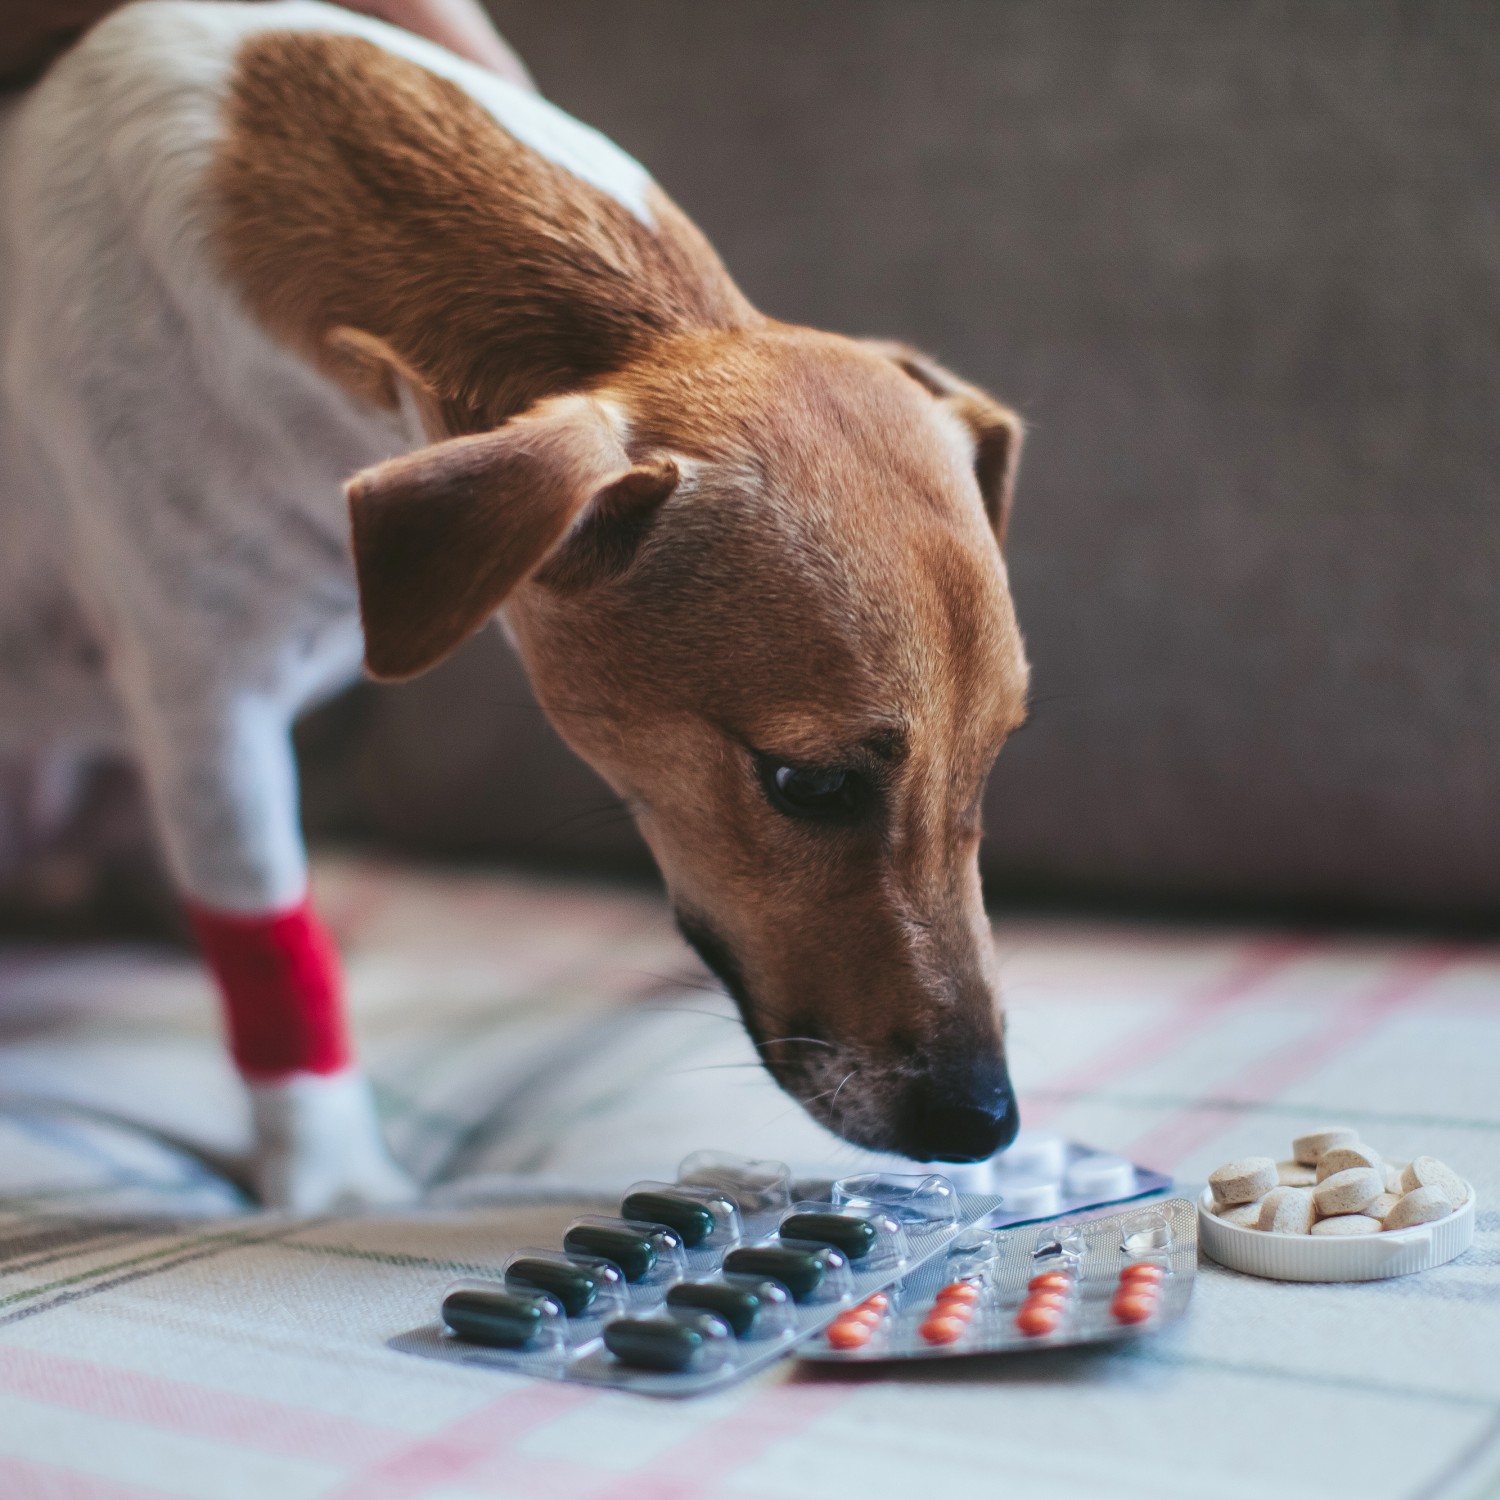 Brown and White Dog Sniffing Medication